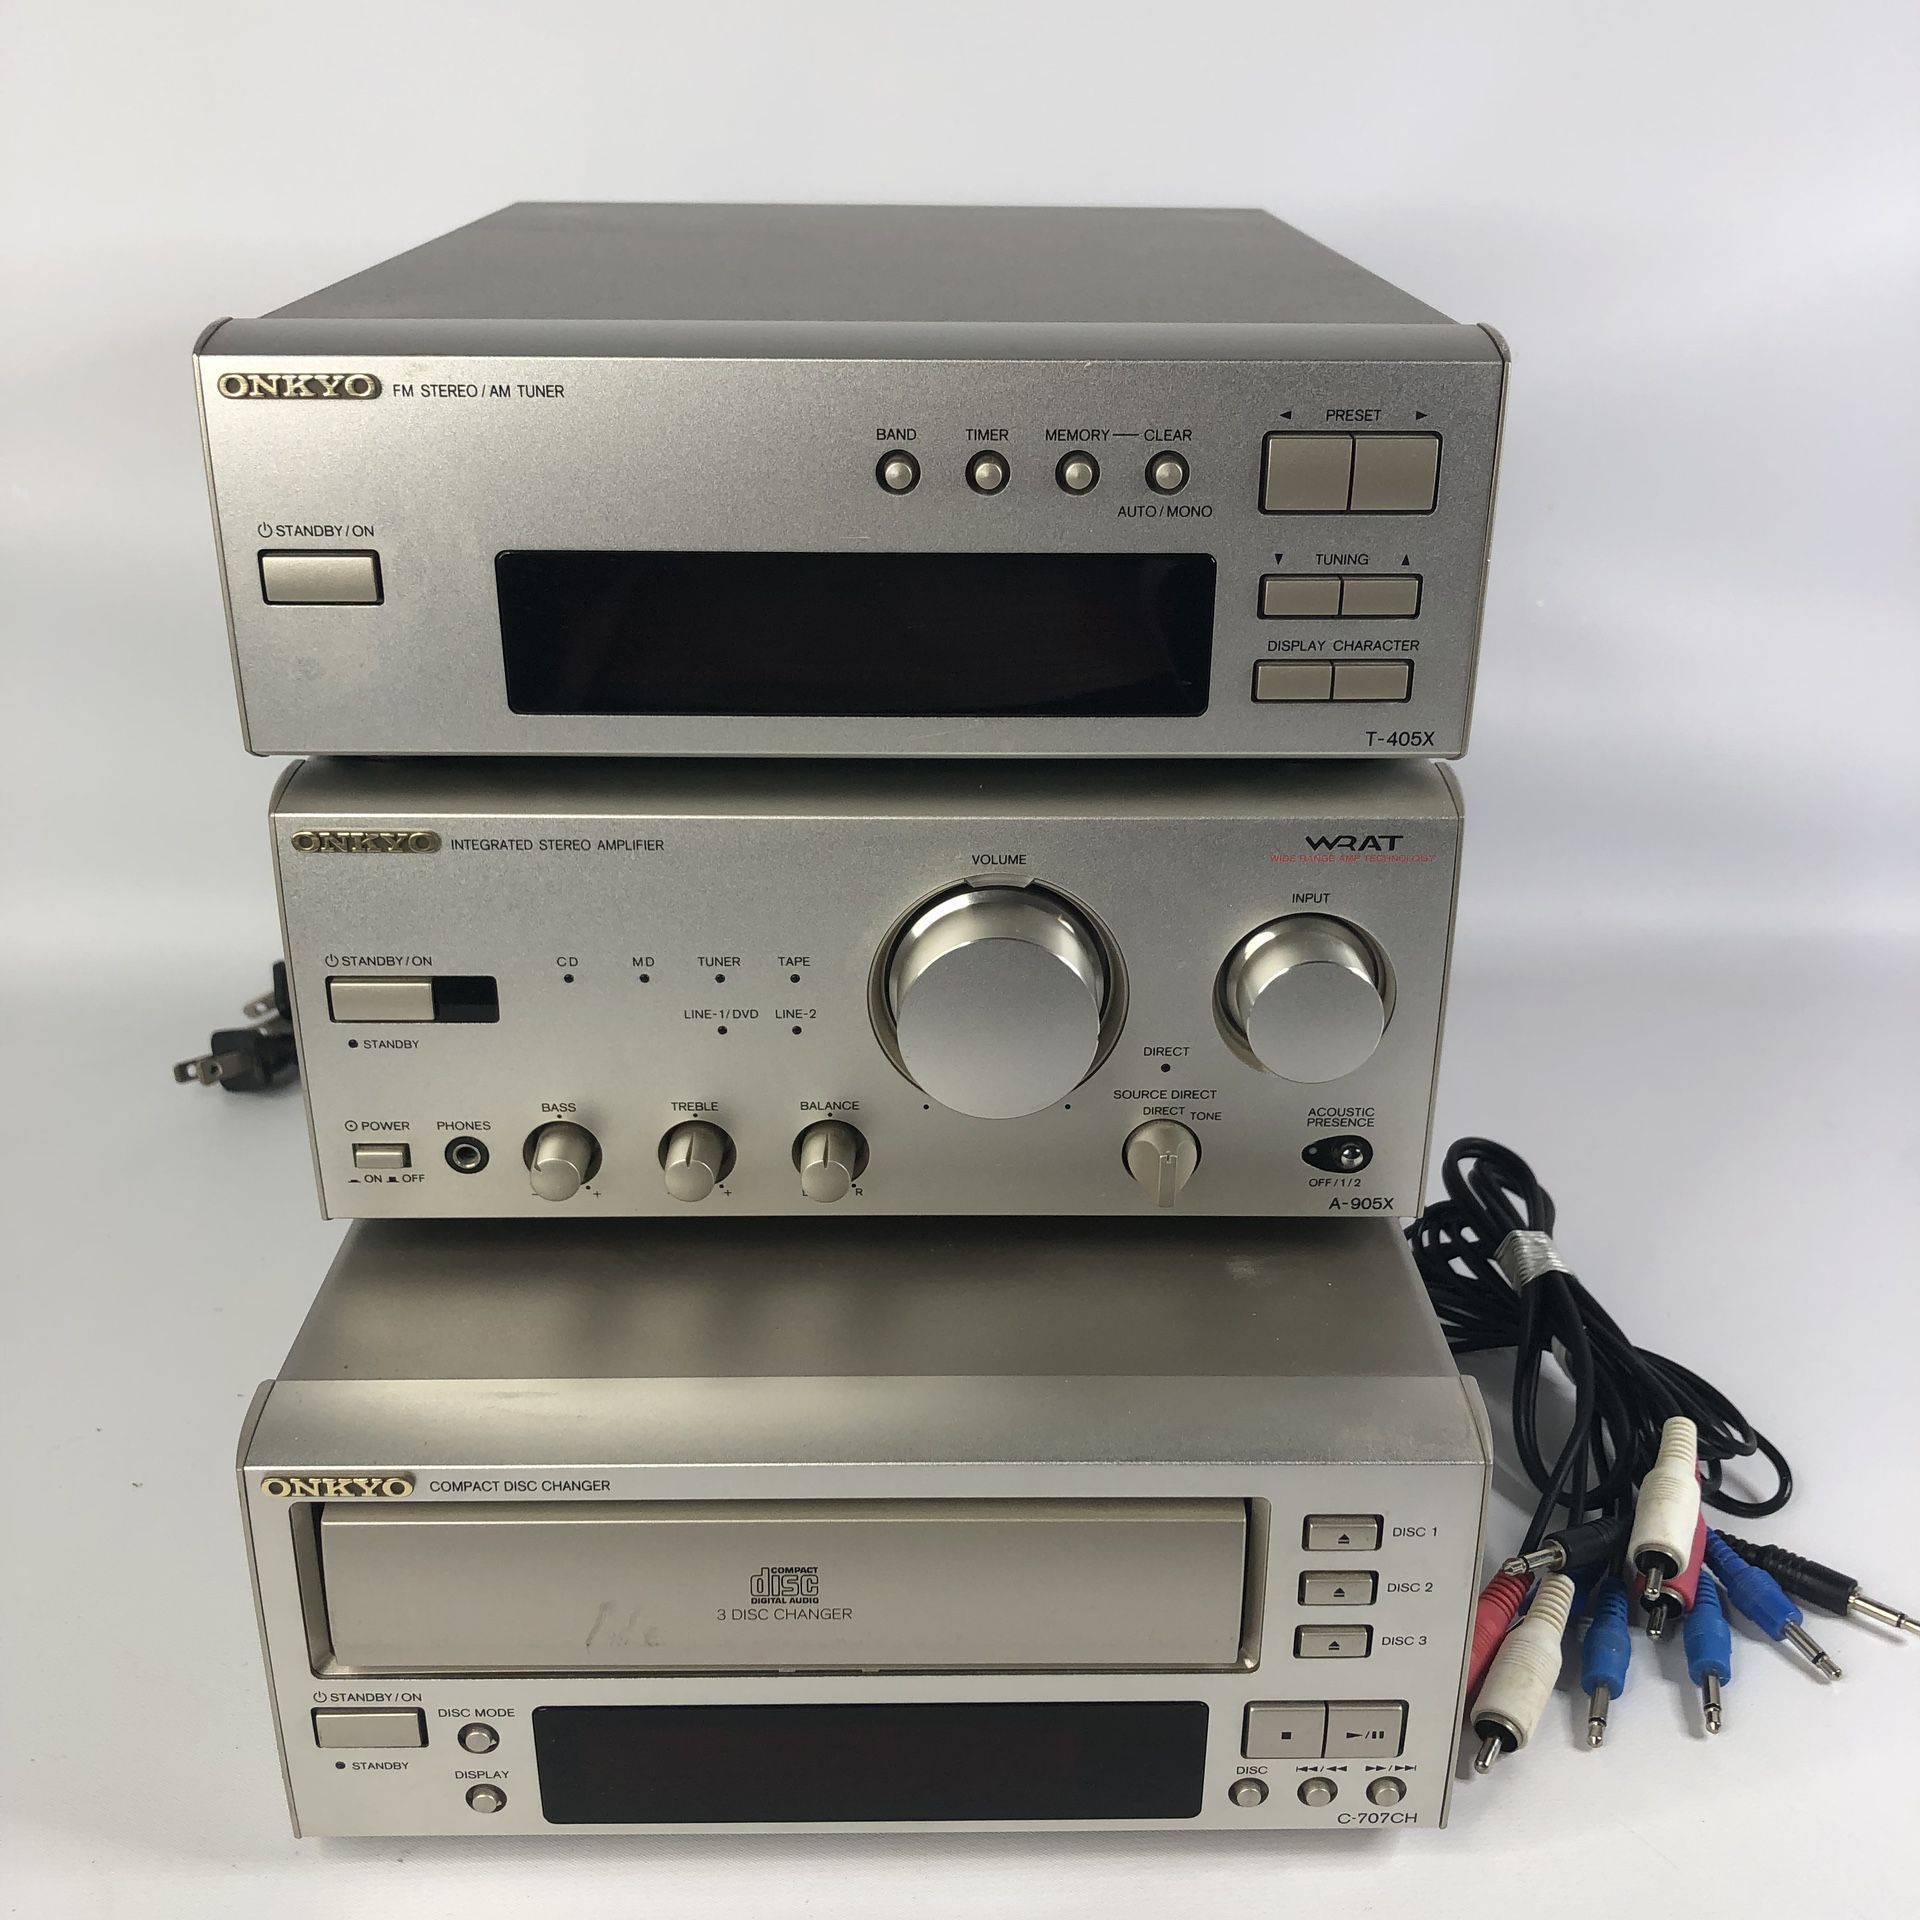 Onkyo A-905x integrated amplifier, T-405x Tuner, C-707CH 3 Disc CD player